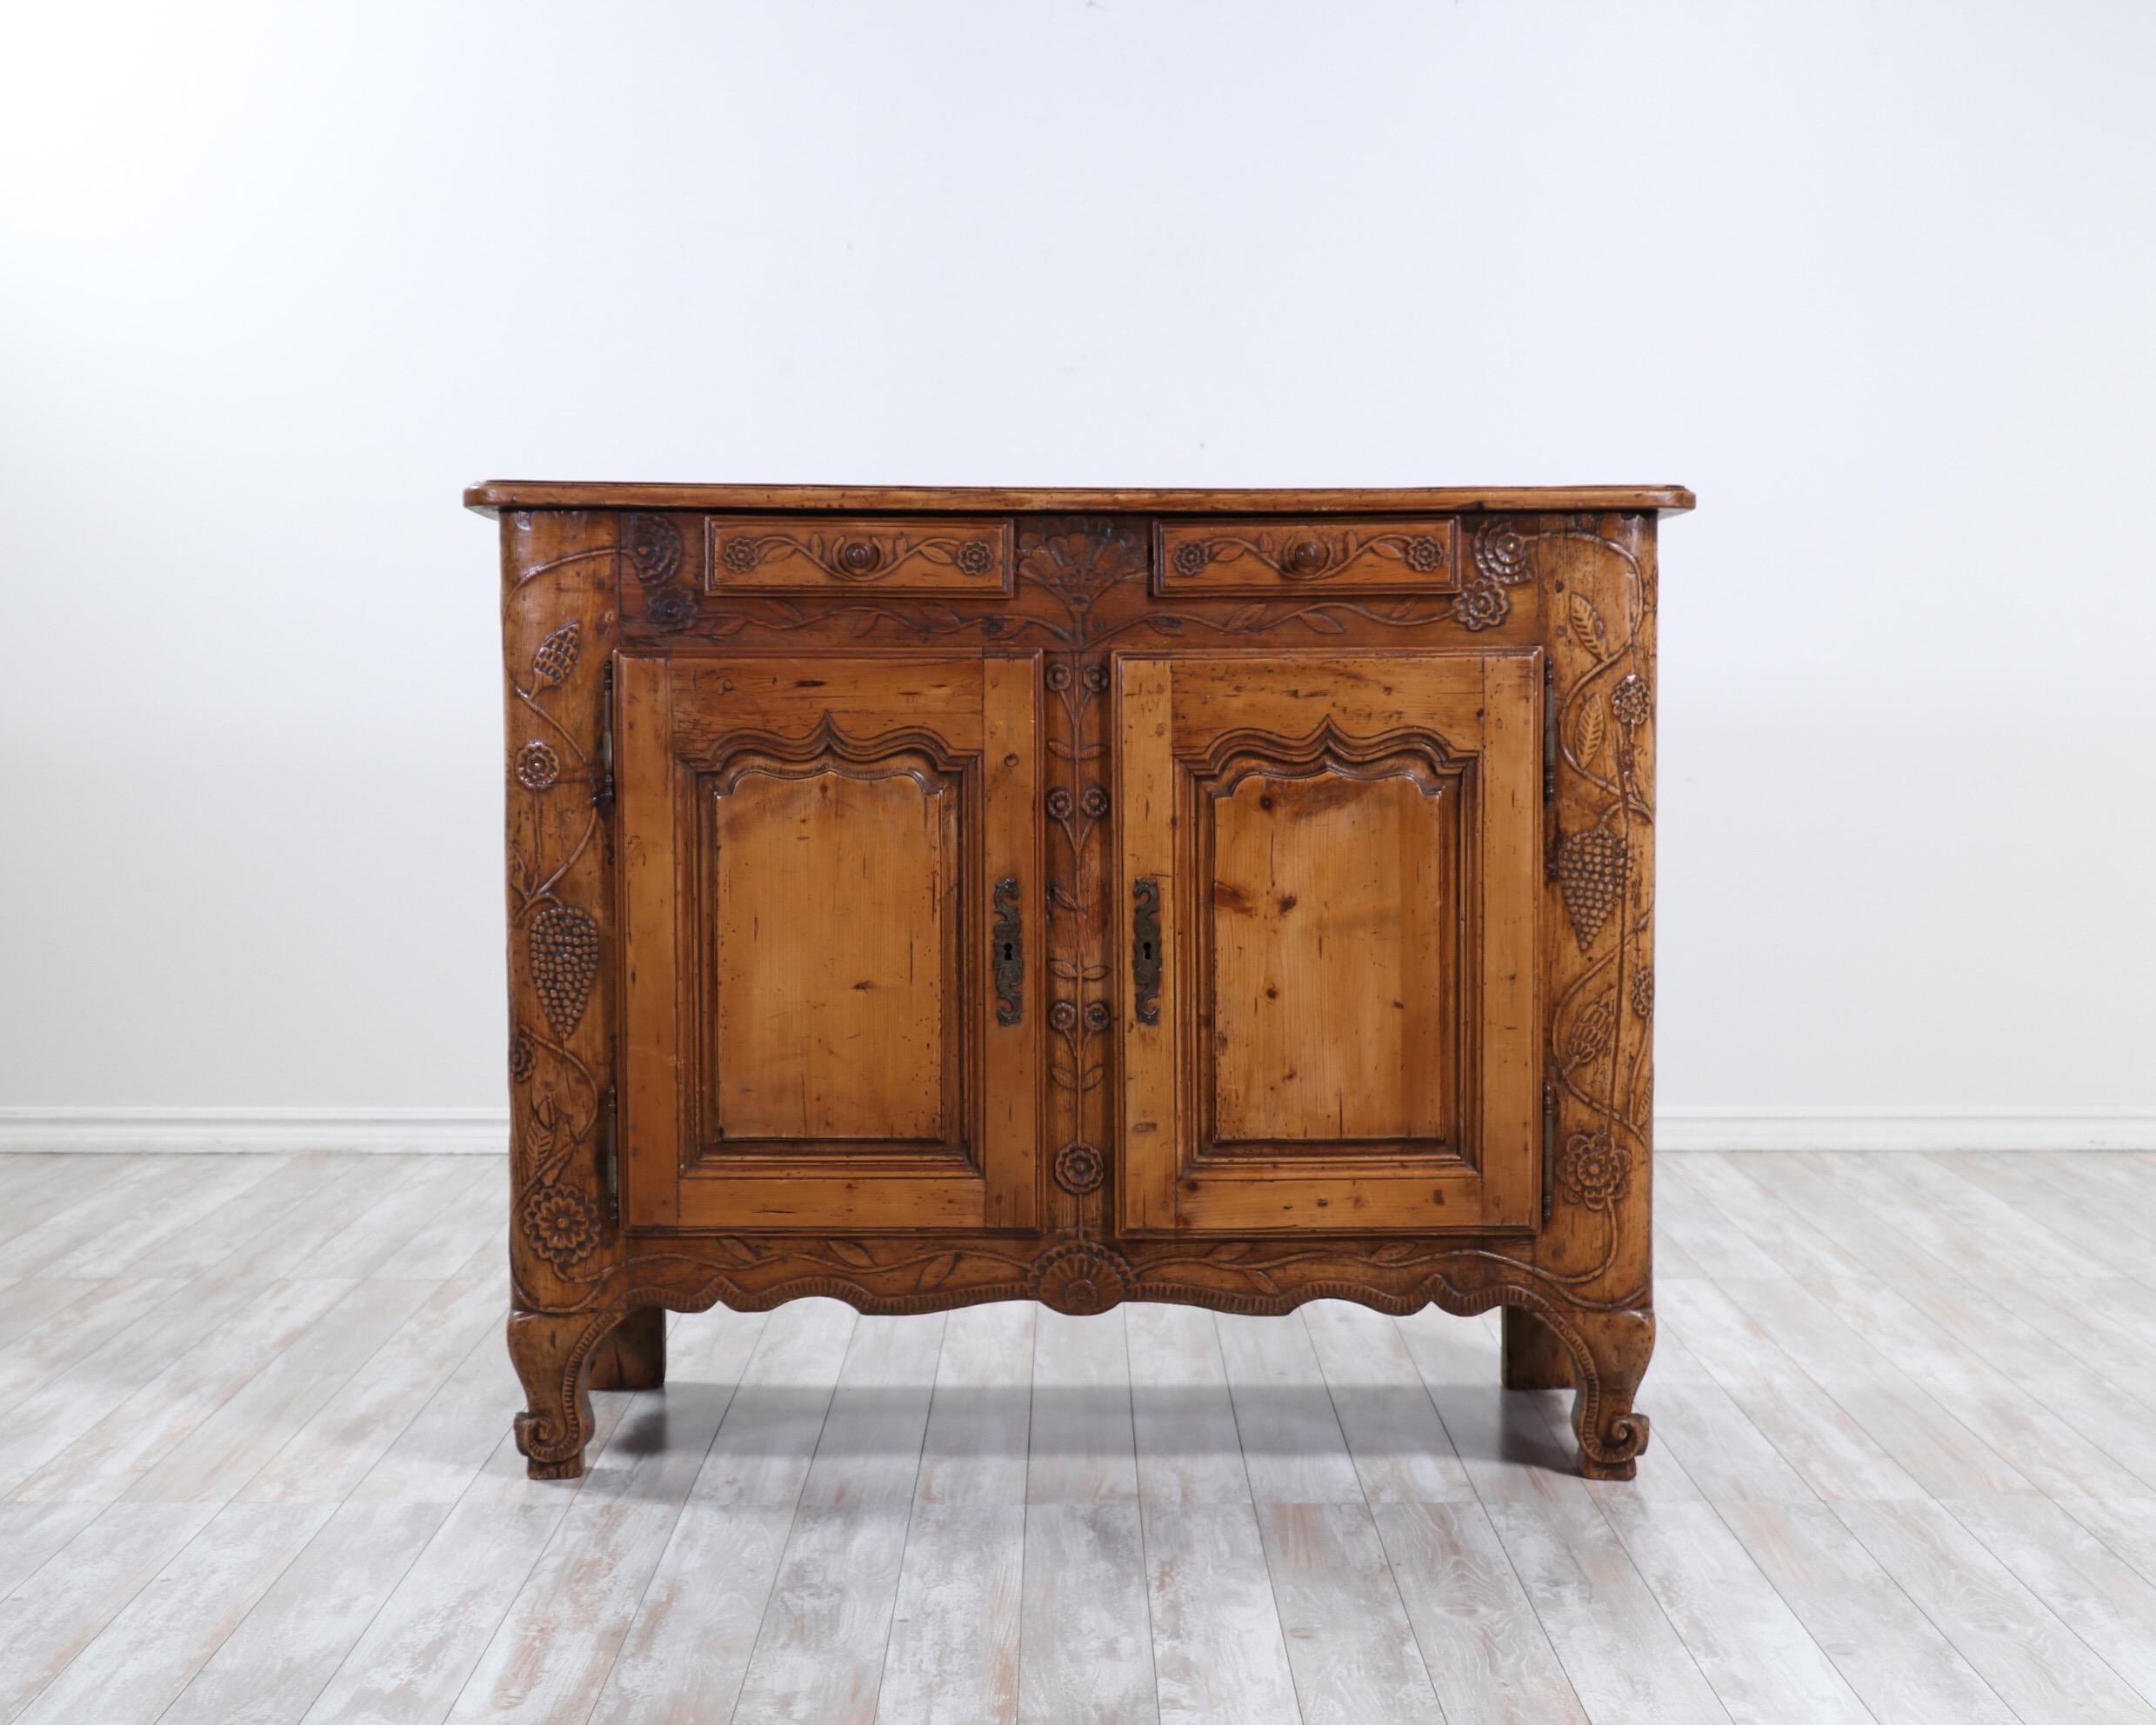 Gorgeous, French late 19th century sideboard with carved floral decorations in the provincial style.

The sideboard offers plenty of storage space, is solidly constructed, sturdy and ready for many more years of use and enjoyment. 

 